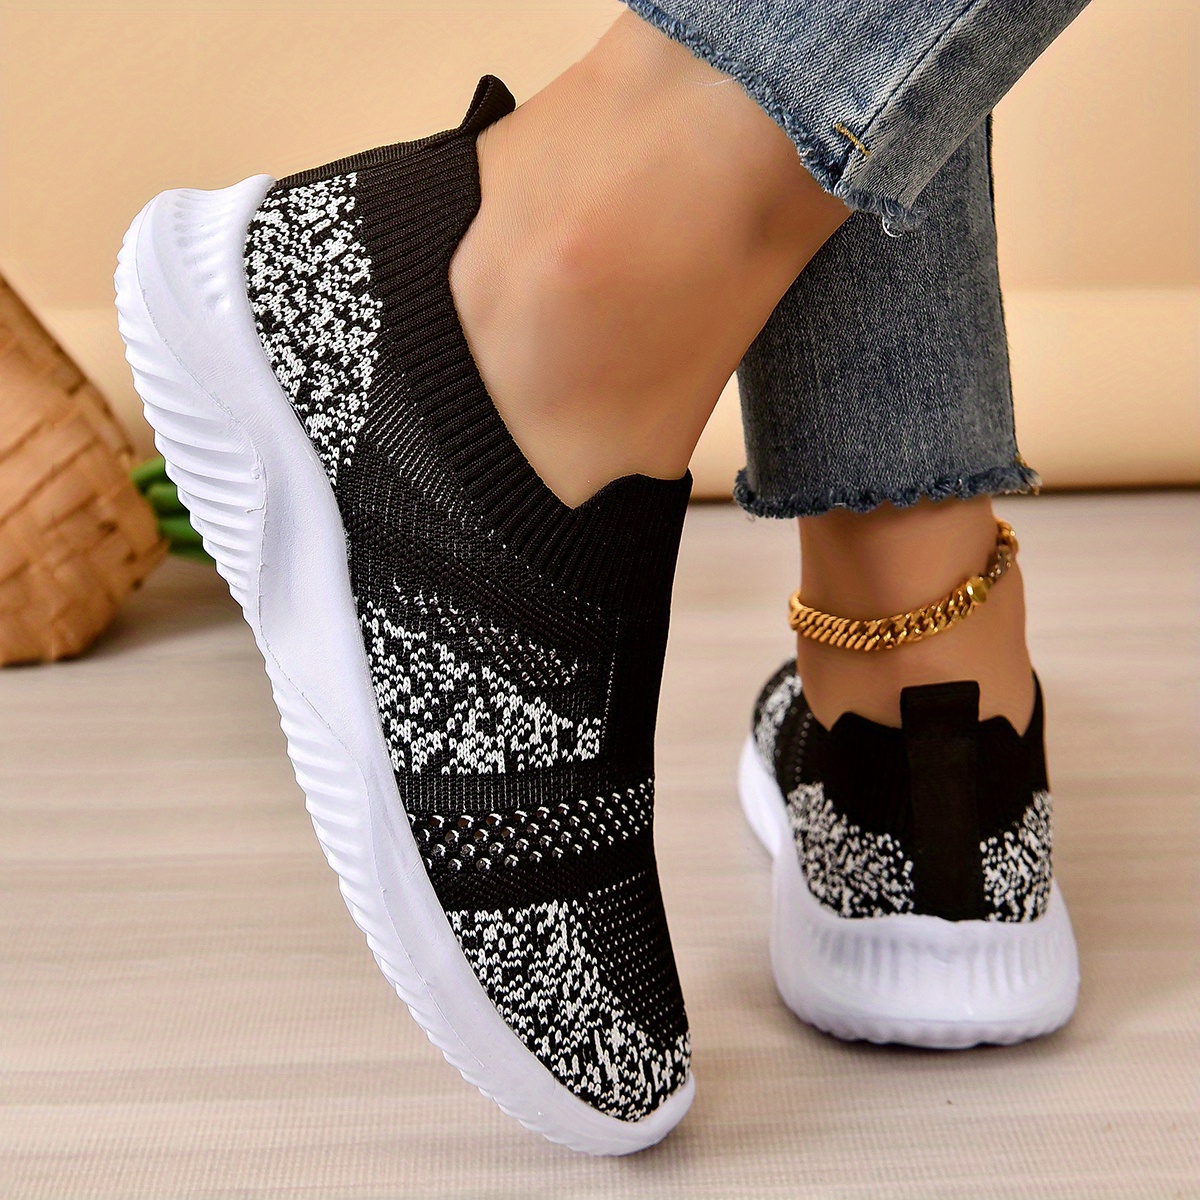 EEUK 2022 Spring Sneakers Women Casual Breathable Sport Shoes Fashion, Flat  Fly Woven Breathable Hook and Loop Fastener Mesh Shoes Casual Breathable